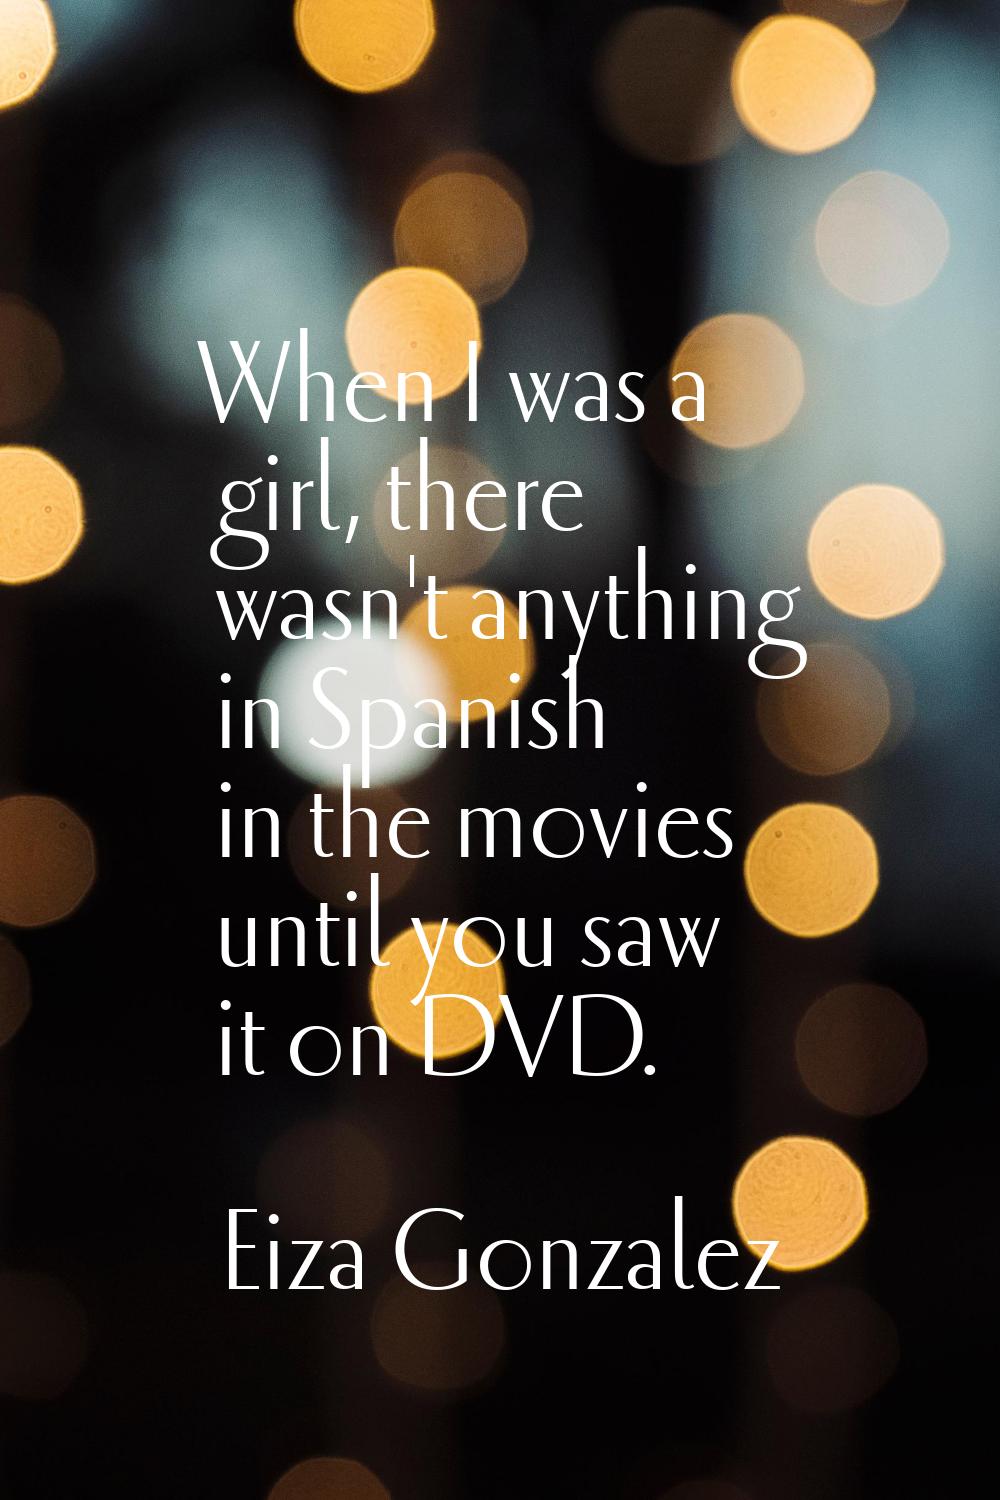 When I was a girl, there wasn't anything in Spanish in the movies until you saw it on DVD.